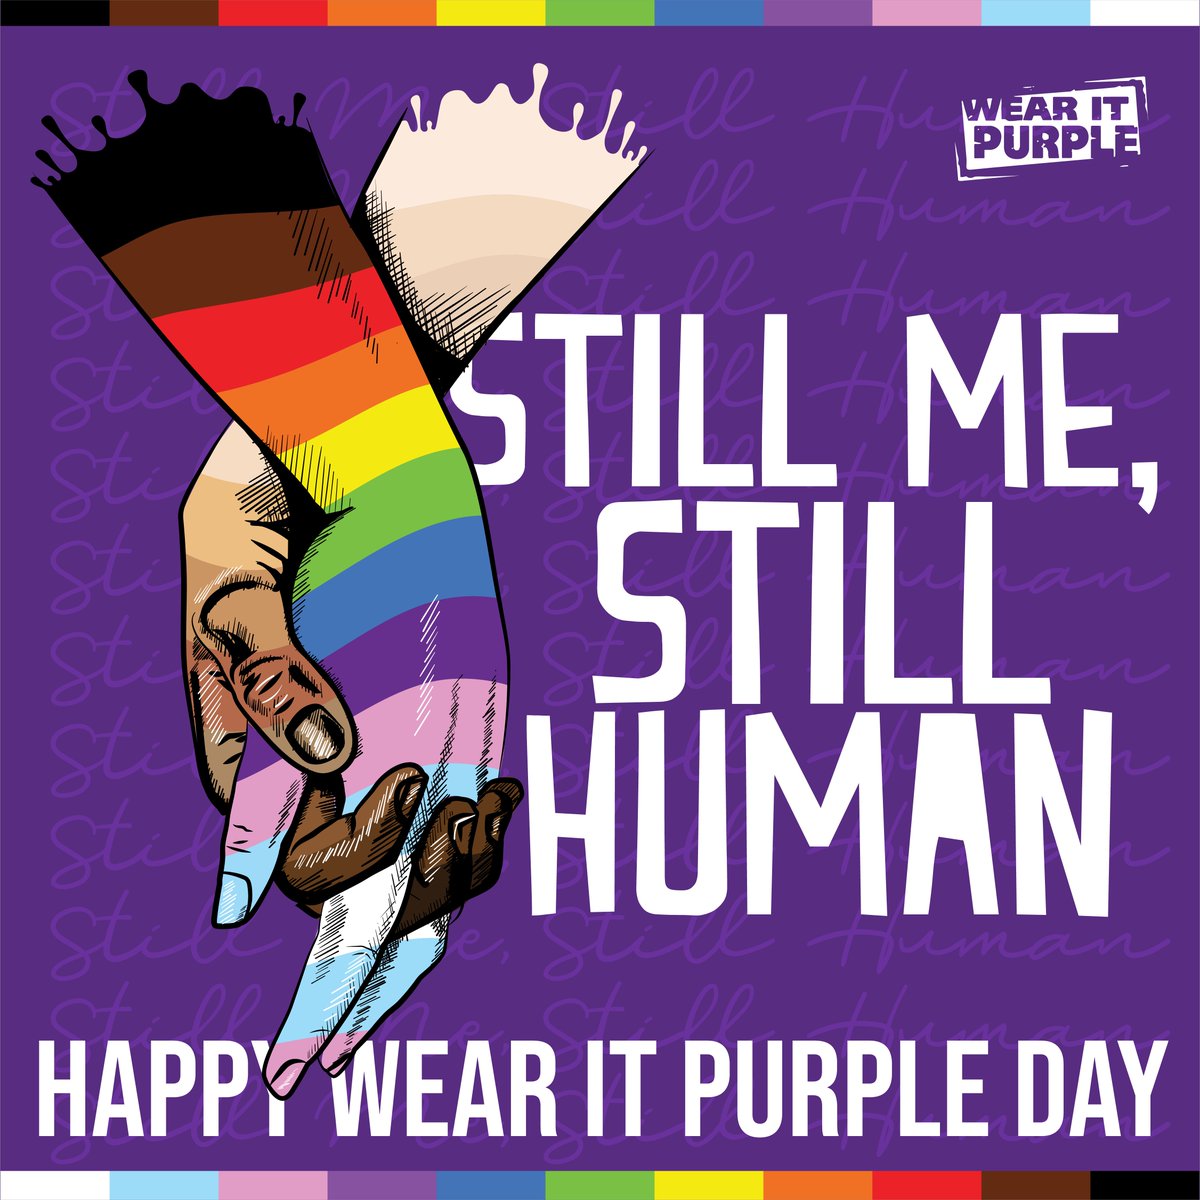 Monash Health is proud to support Wear it Purple Day on 26 August, and we encourage you to wear something purple tomorrow to help support the rights of young people in the LGBTI+ community.